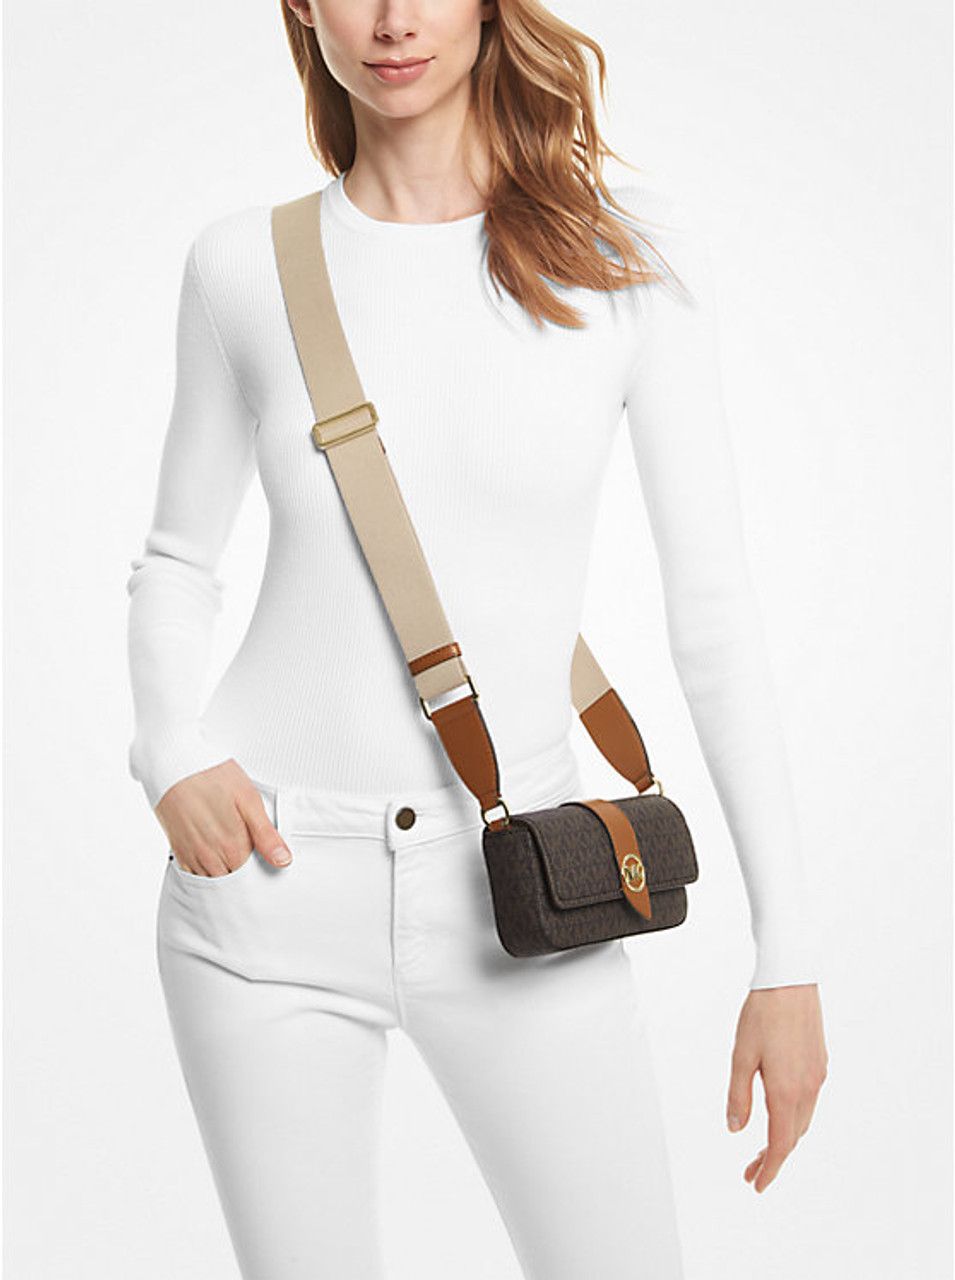 Michael Kors Greenwich Extra-Small Saffiano Leather Sling